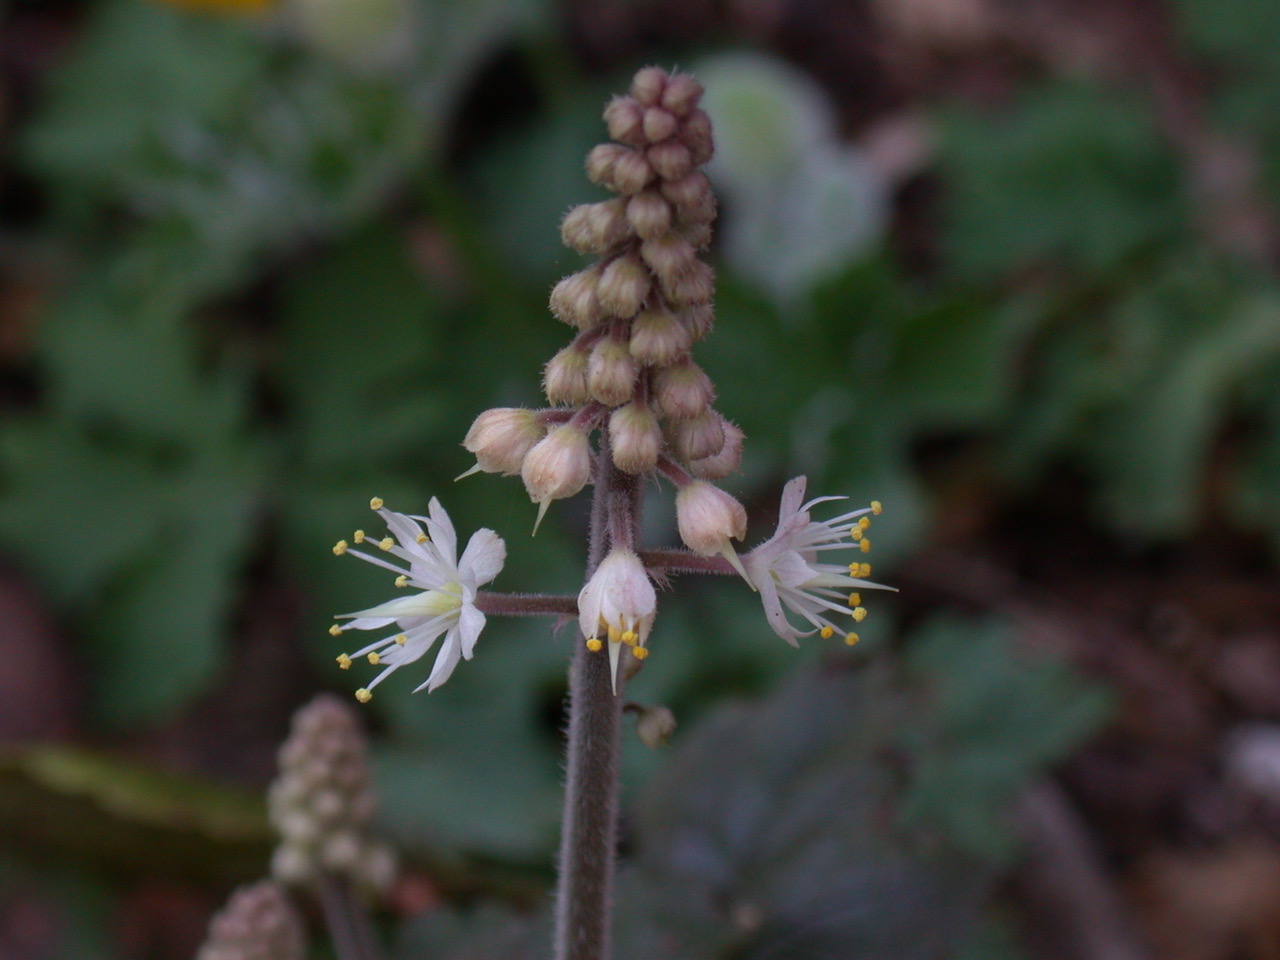 The Scientific Name is Tiarella cordifolia. You will likely hear them called Foamflower, False Miterwort. This picture shows the Buds beginning to open of Tiarella cordifolia